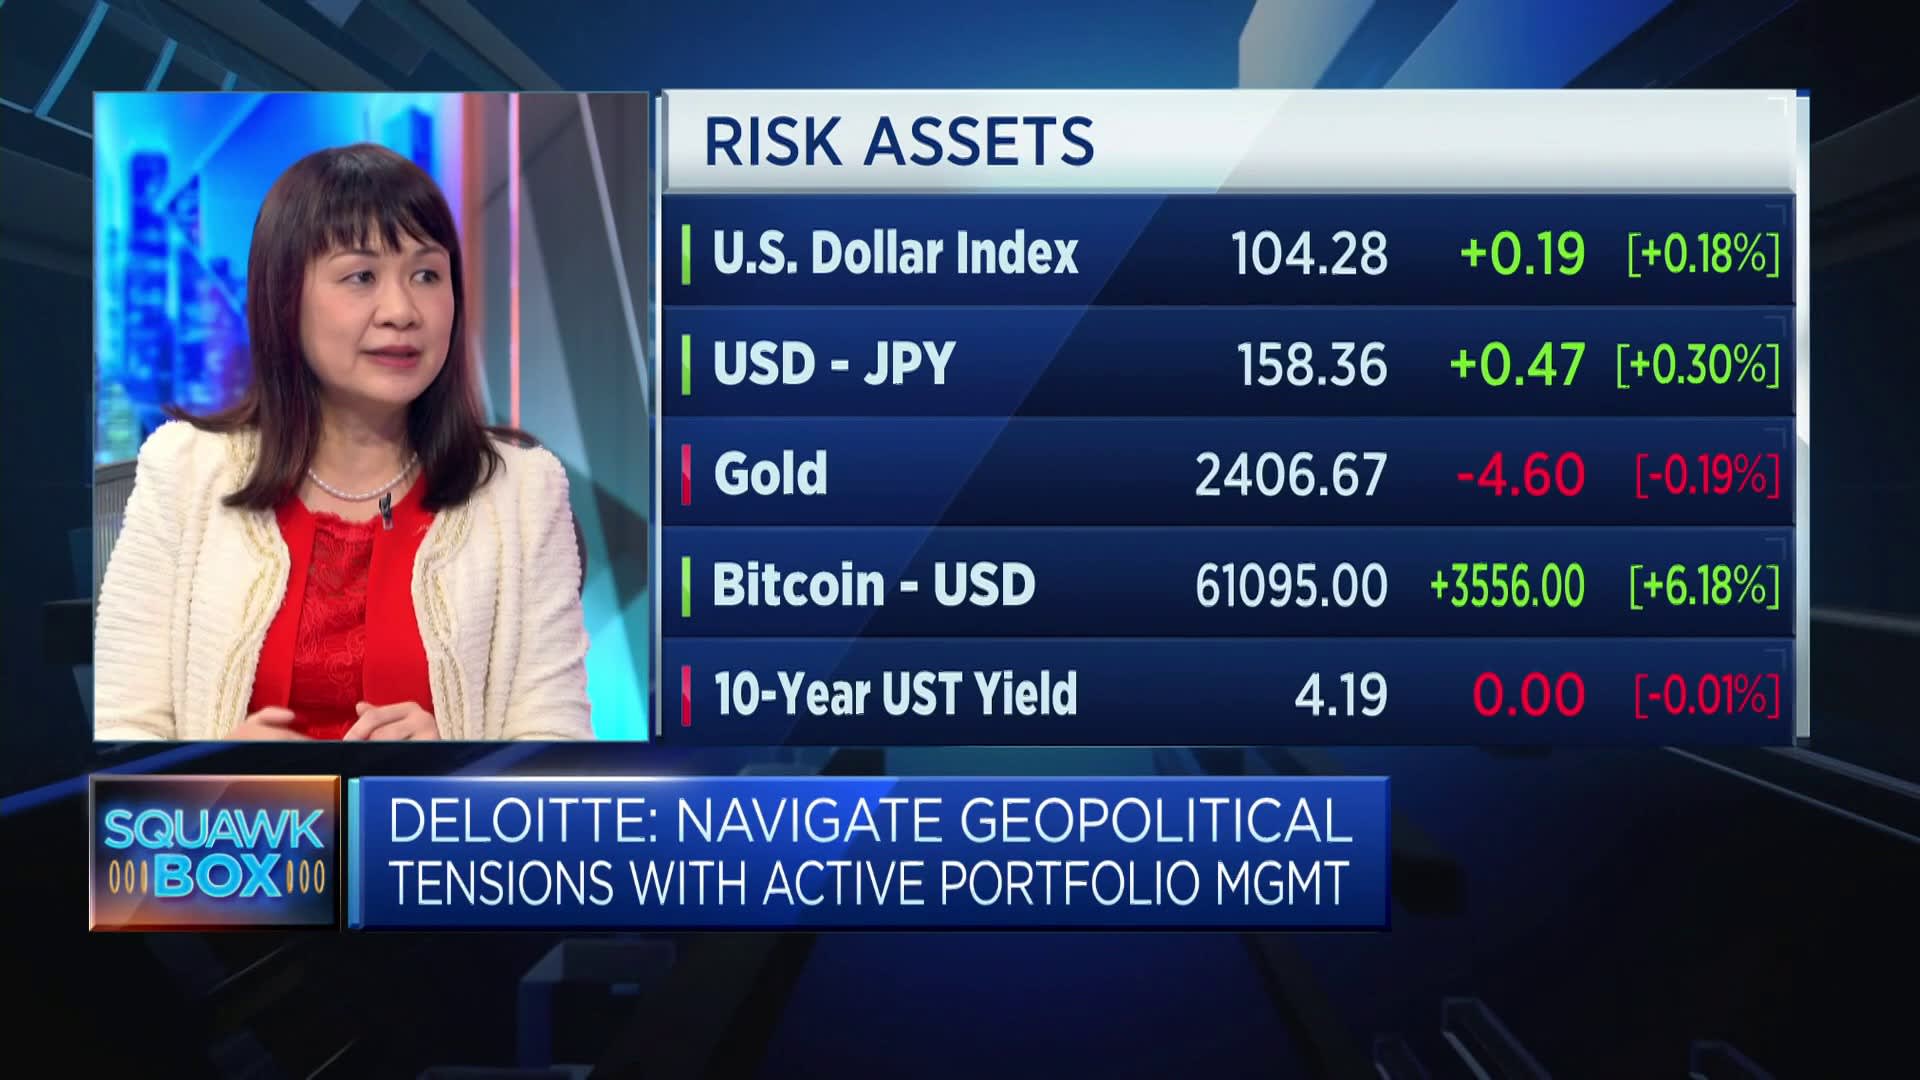 Deloitte discusses the impact of geopolitical tensions on investing [Video]